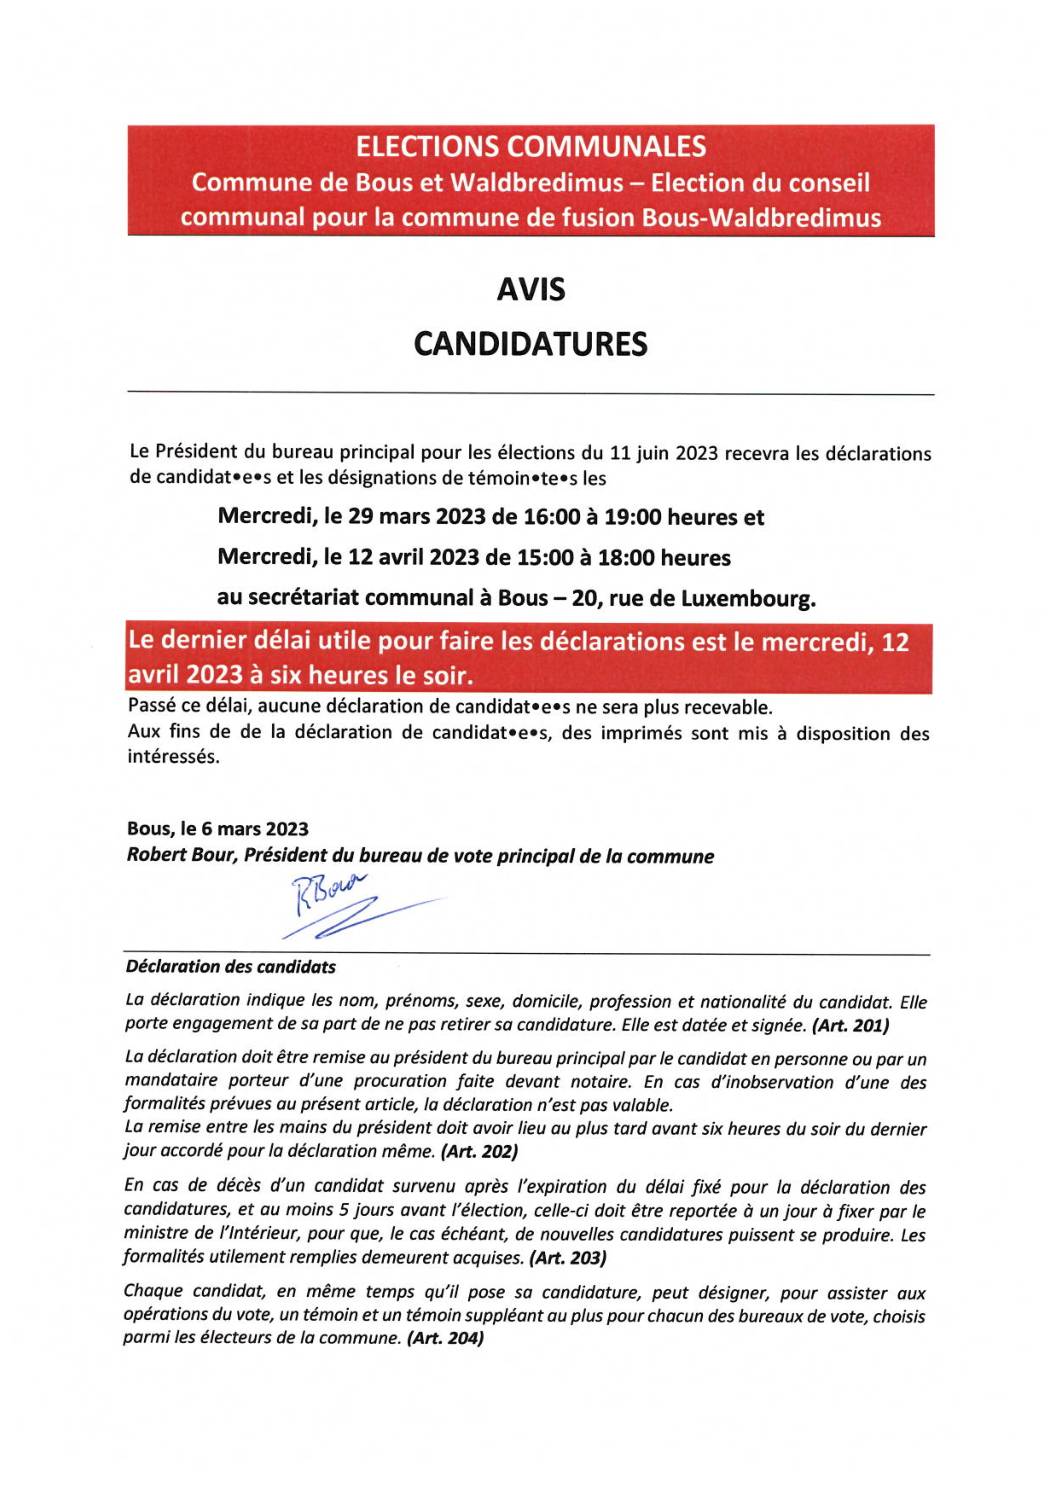 Elections communales – Candidatures